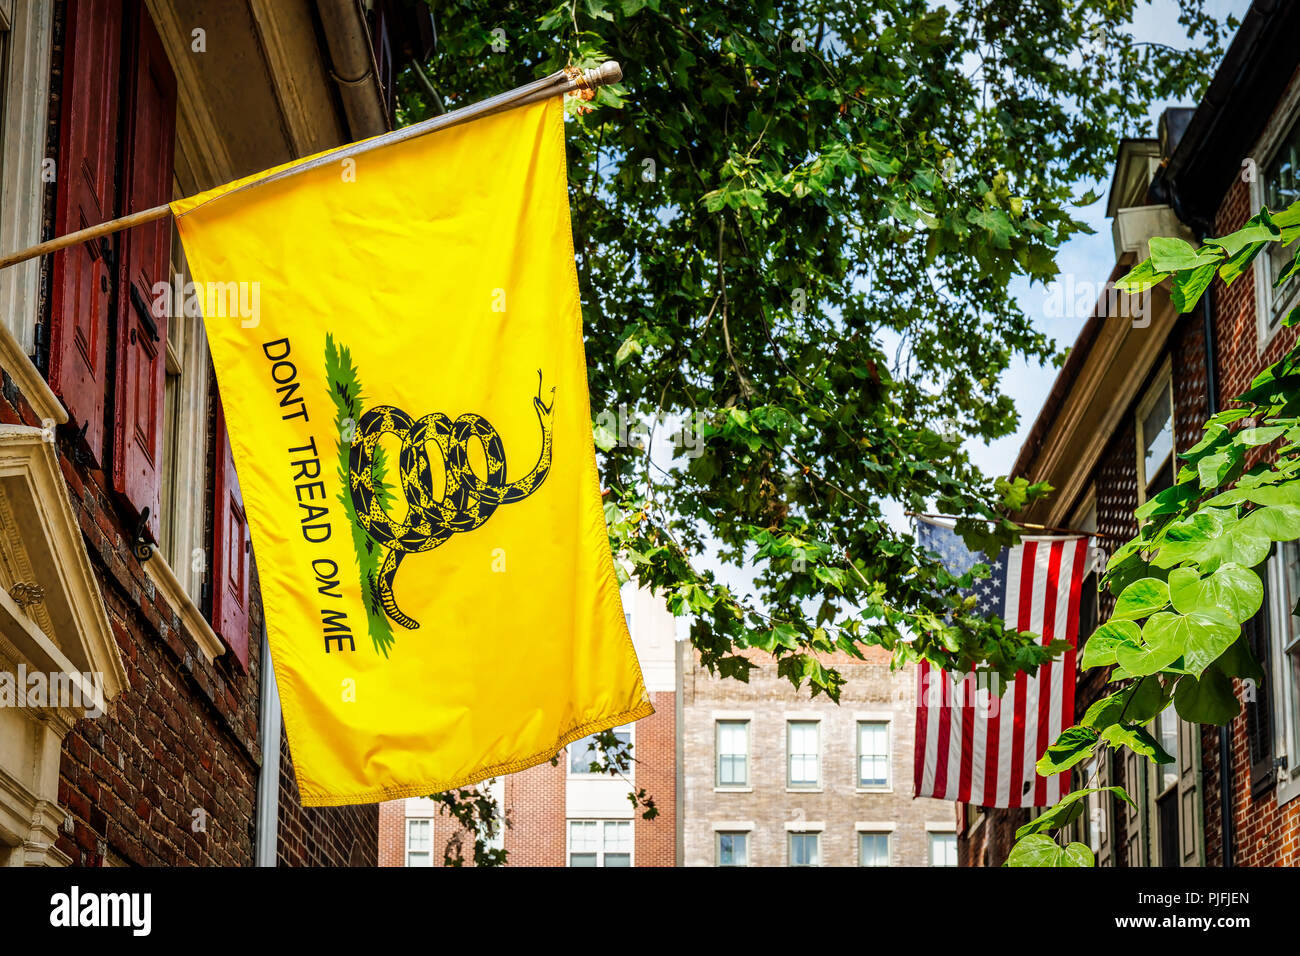 The Gadsden flag, with “Don’t Tread On Me” written on it, was designed by General Christopher Gadsden during the American Revolution. Stock Photo